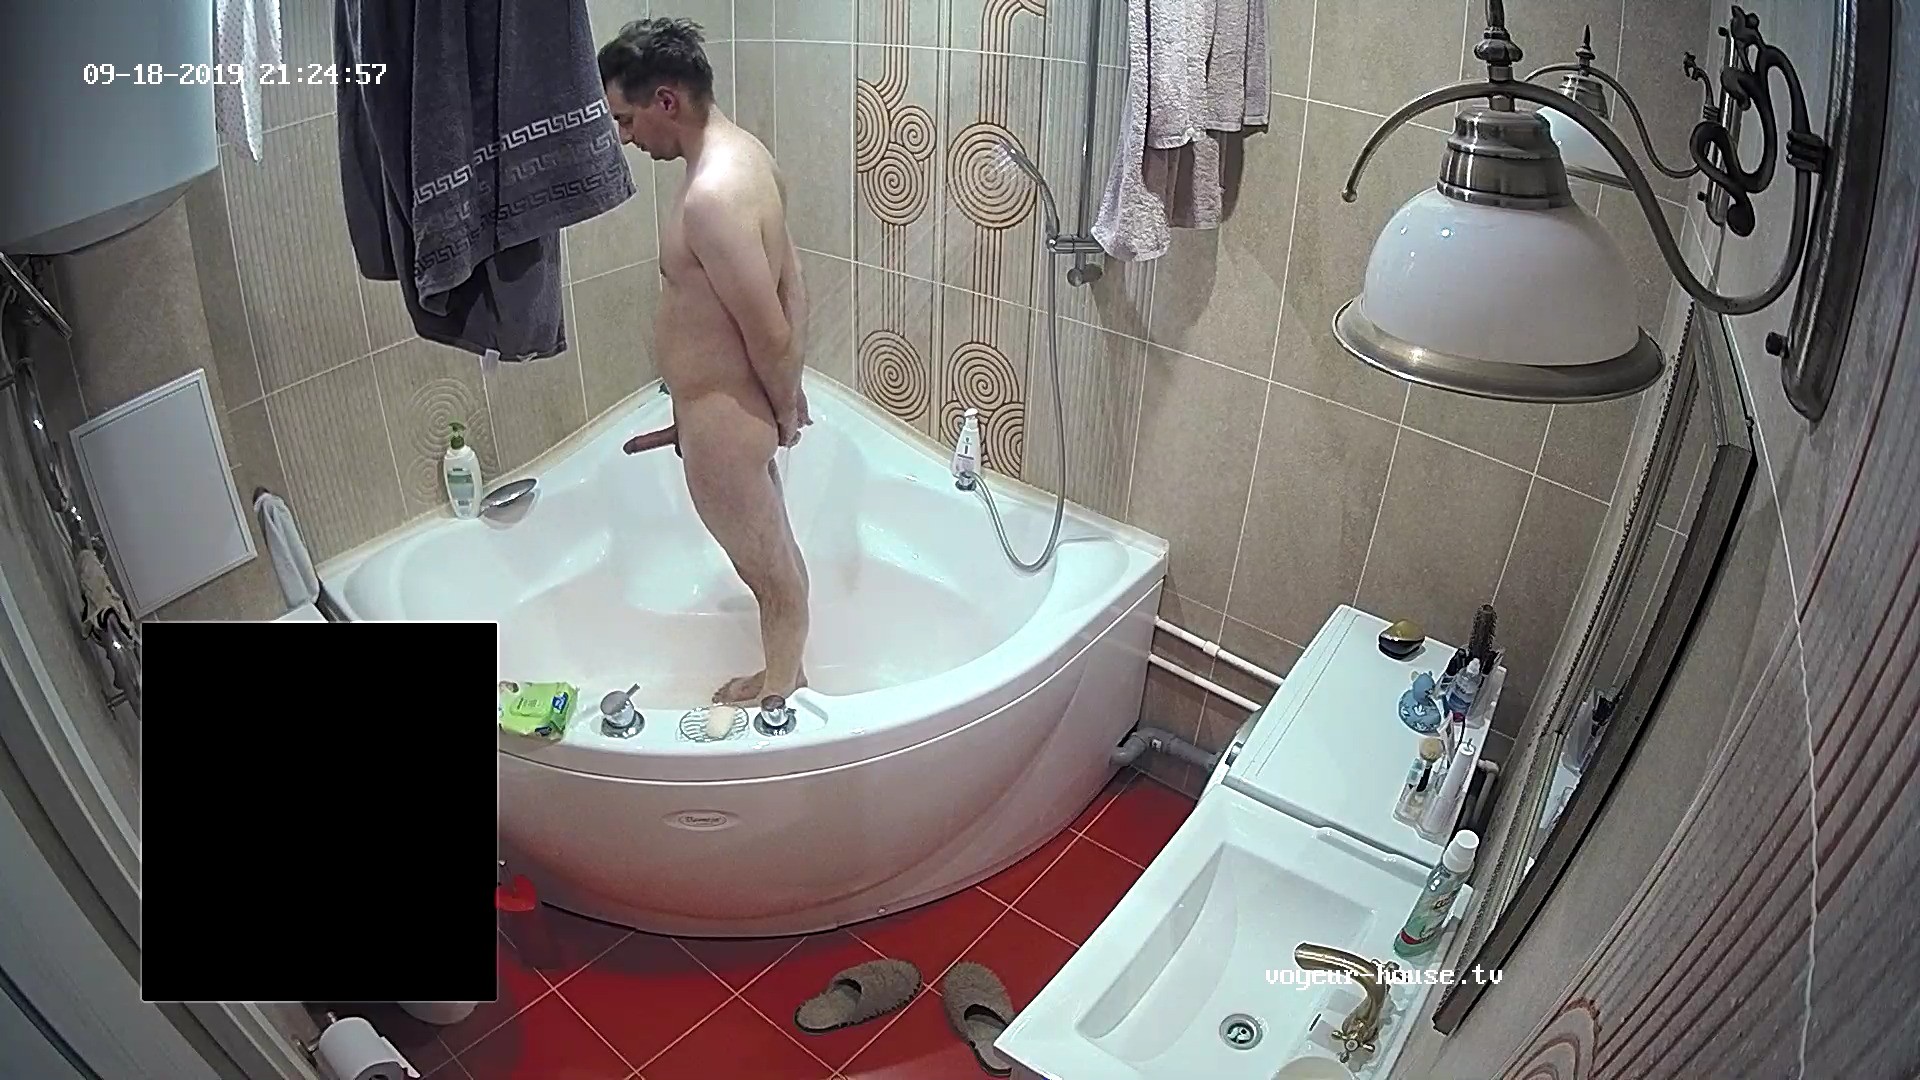 Felix Showers with Erection 18 Sep 2019